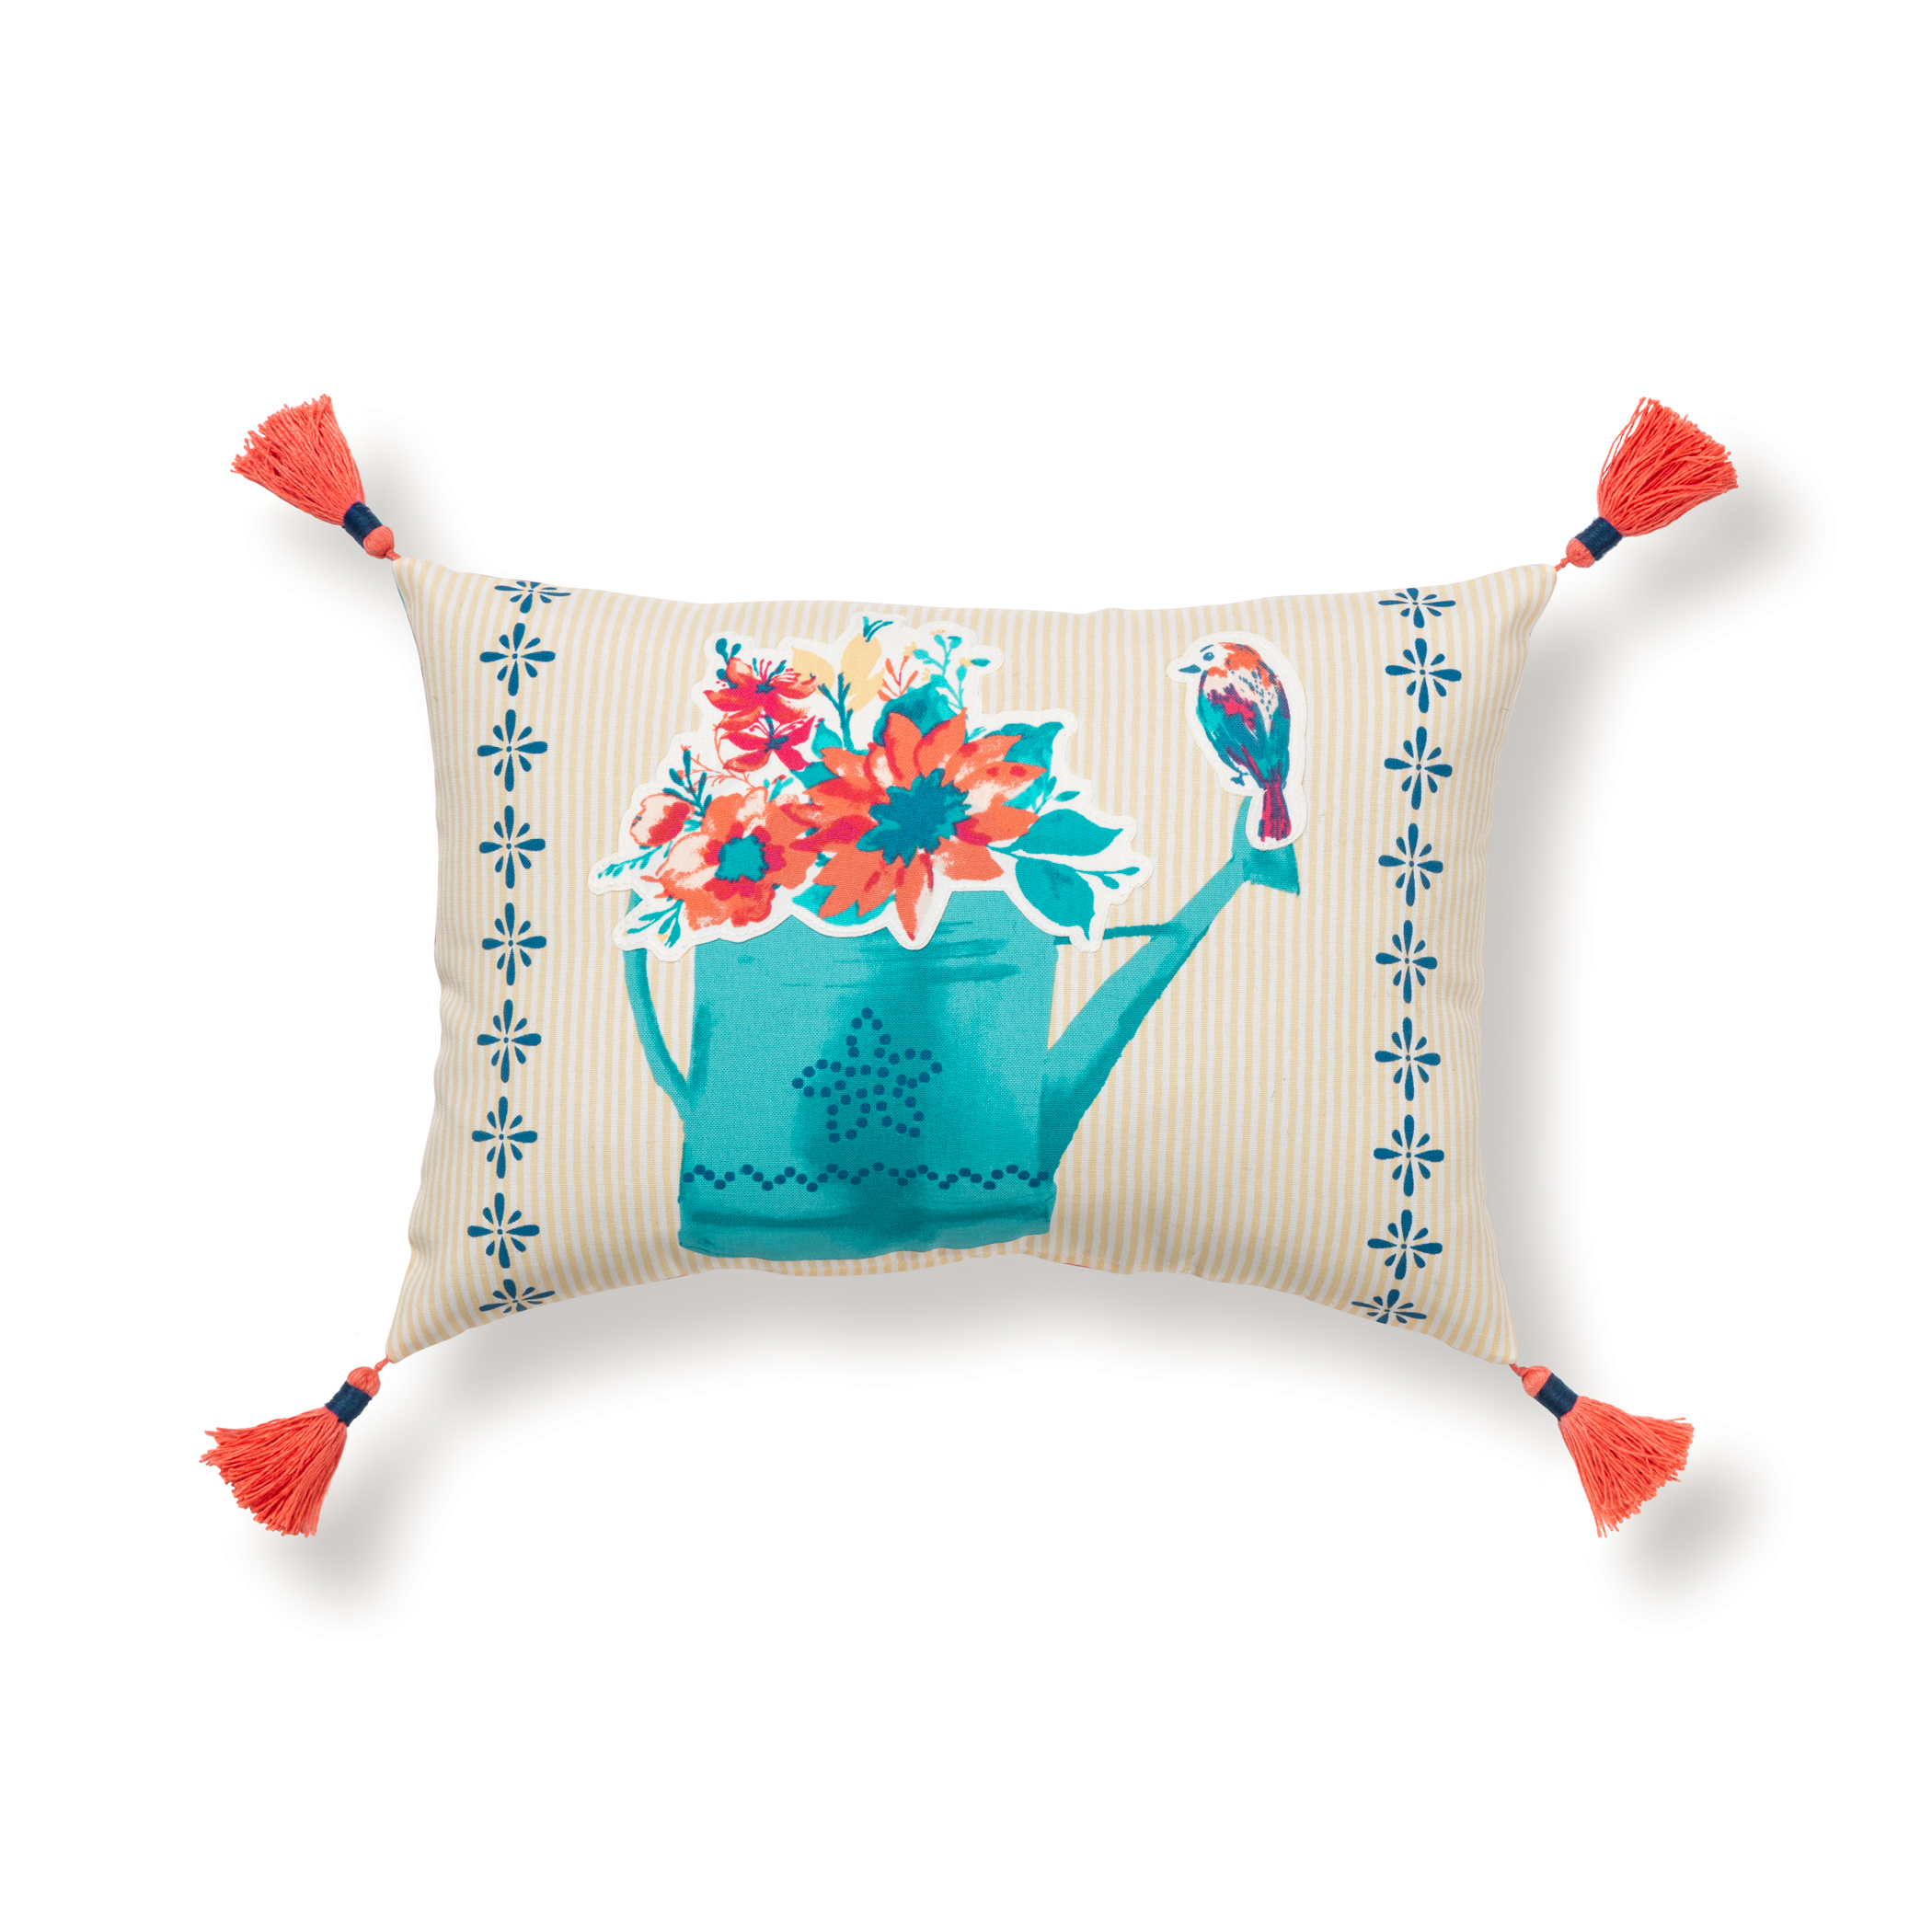 The Pioneer Woman Watering Can Outdoor Rectangle Pillow, Multicolor, 14" x 20" - image 1 of 8